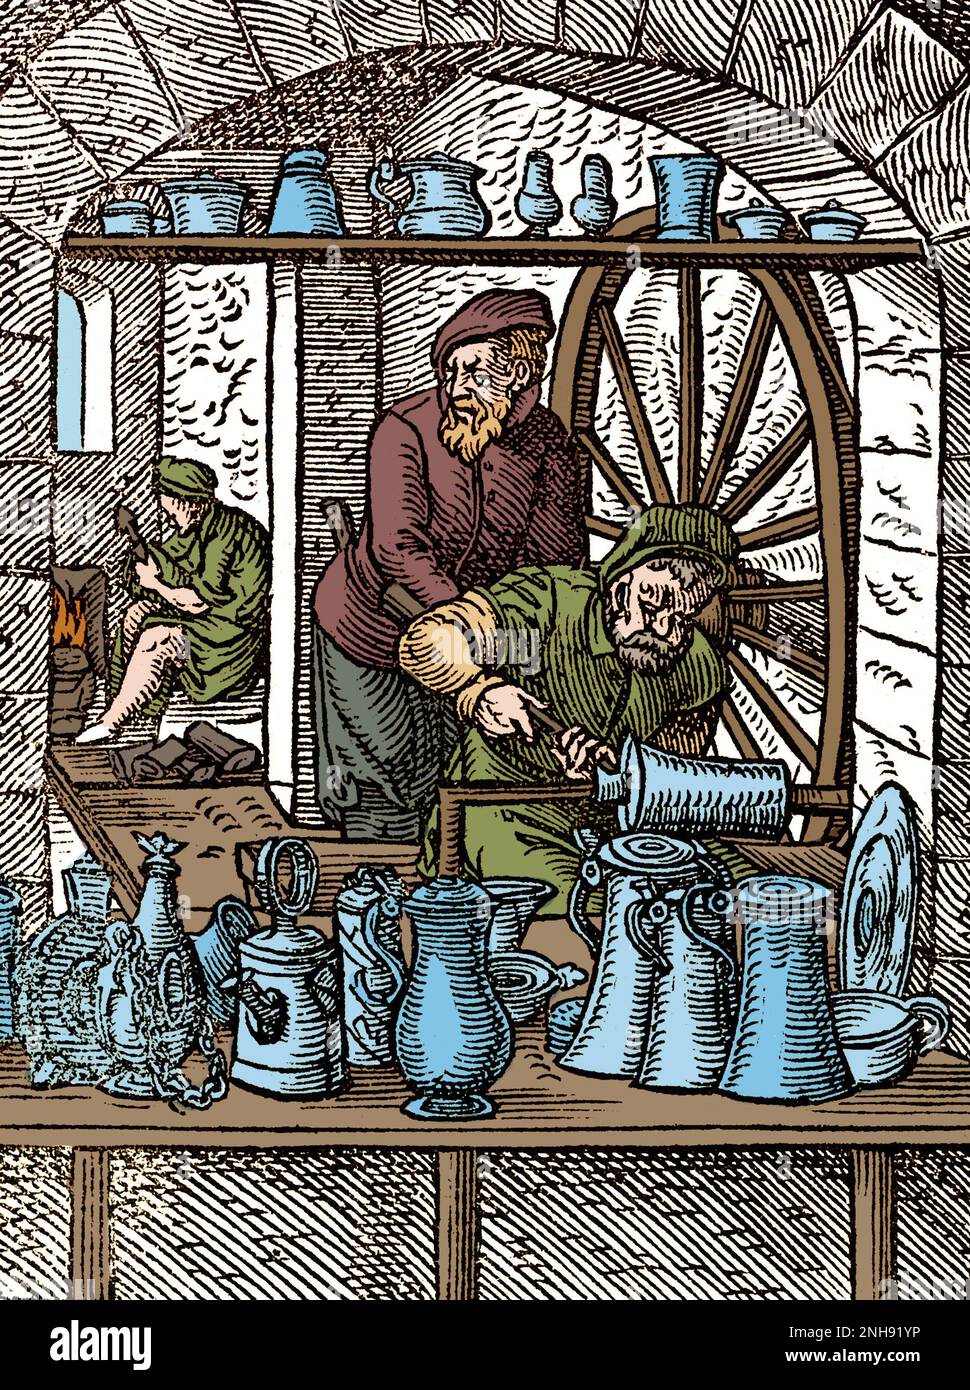 Tin-founders and pewterers making jugs, drinking vessels and other items. Woodcut from Jost Amman's Book of Trades, 1568. Colorized. Stock Photo